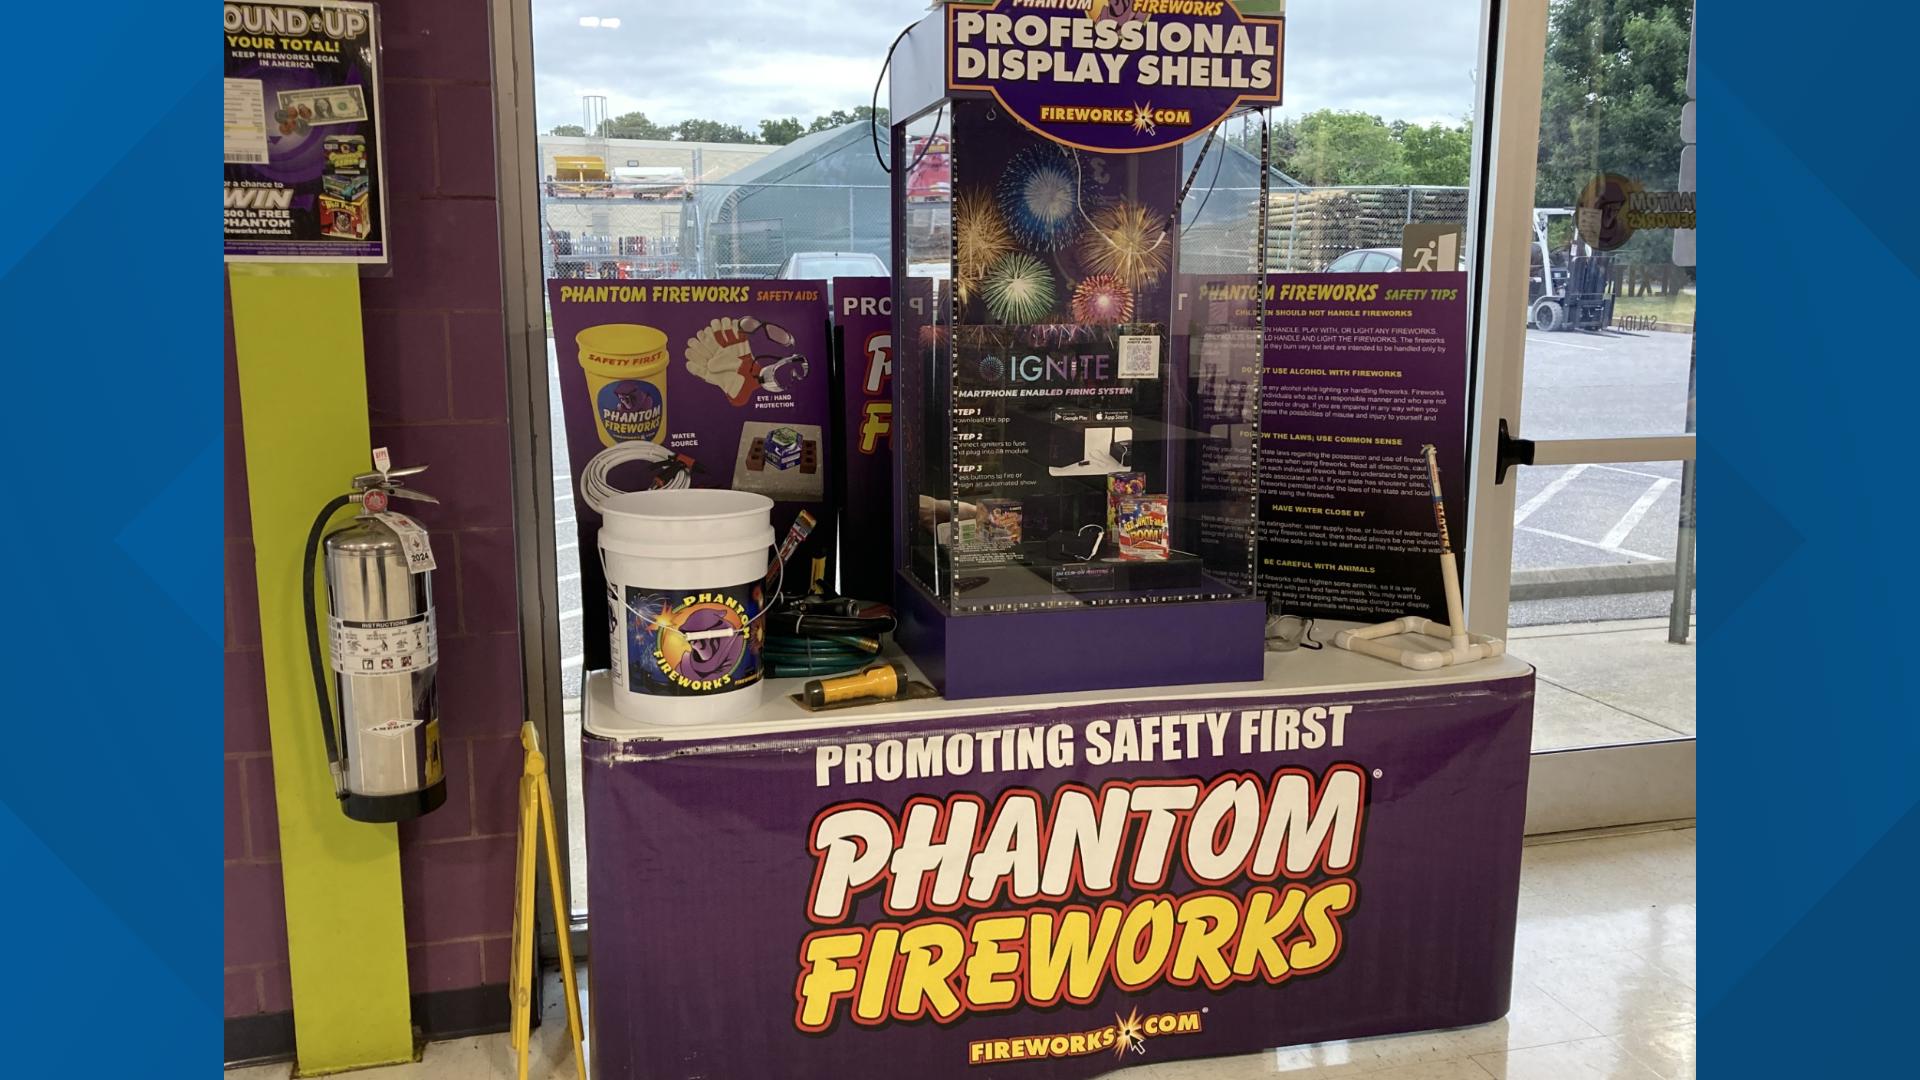 Phantom Fireworks of Shrewsbury in York County is preparing for the busy holiday while emphasizing customer safety.